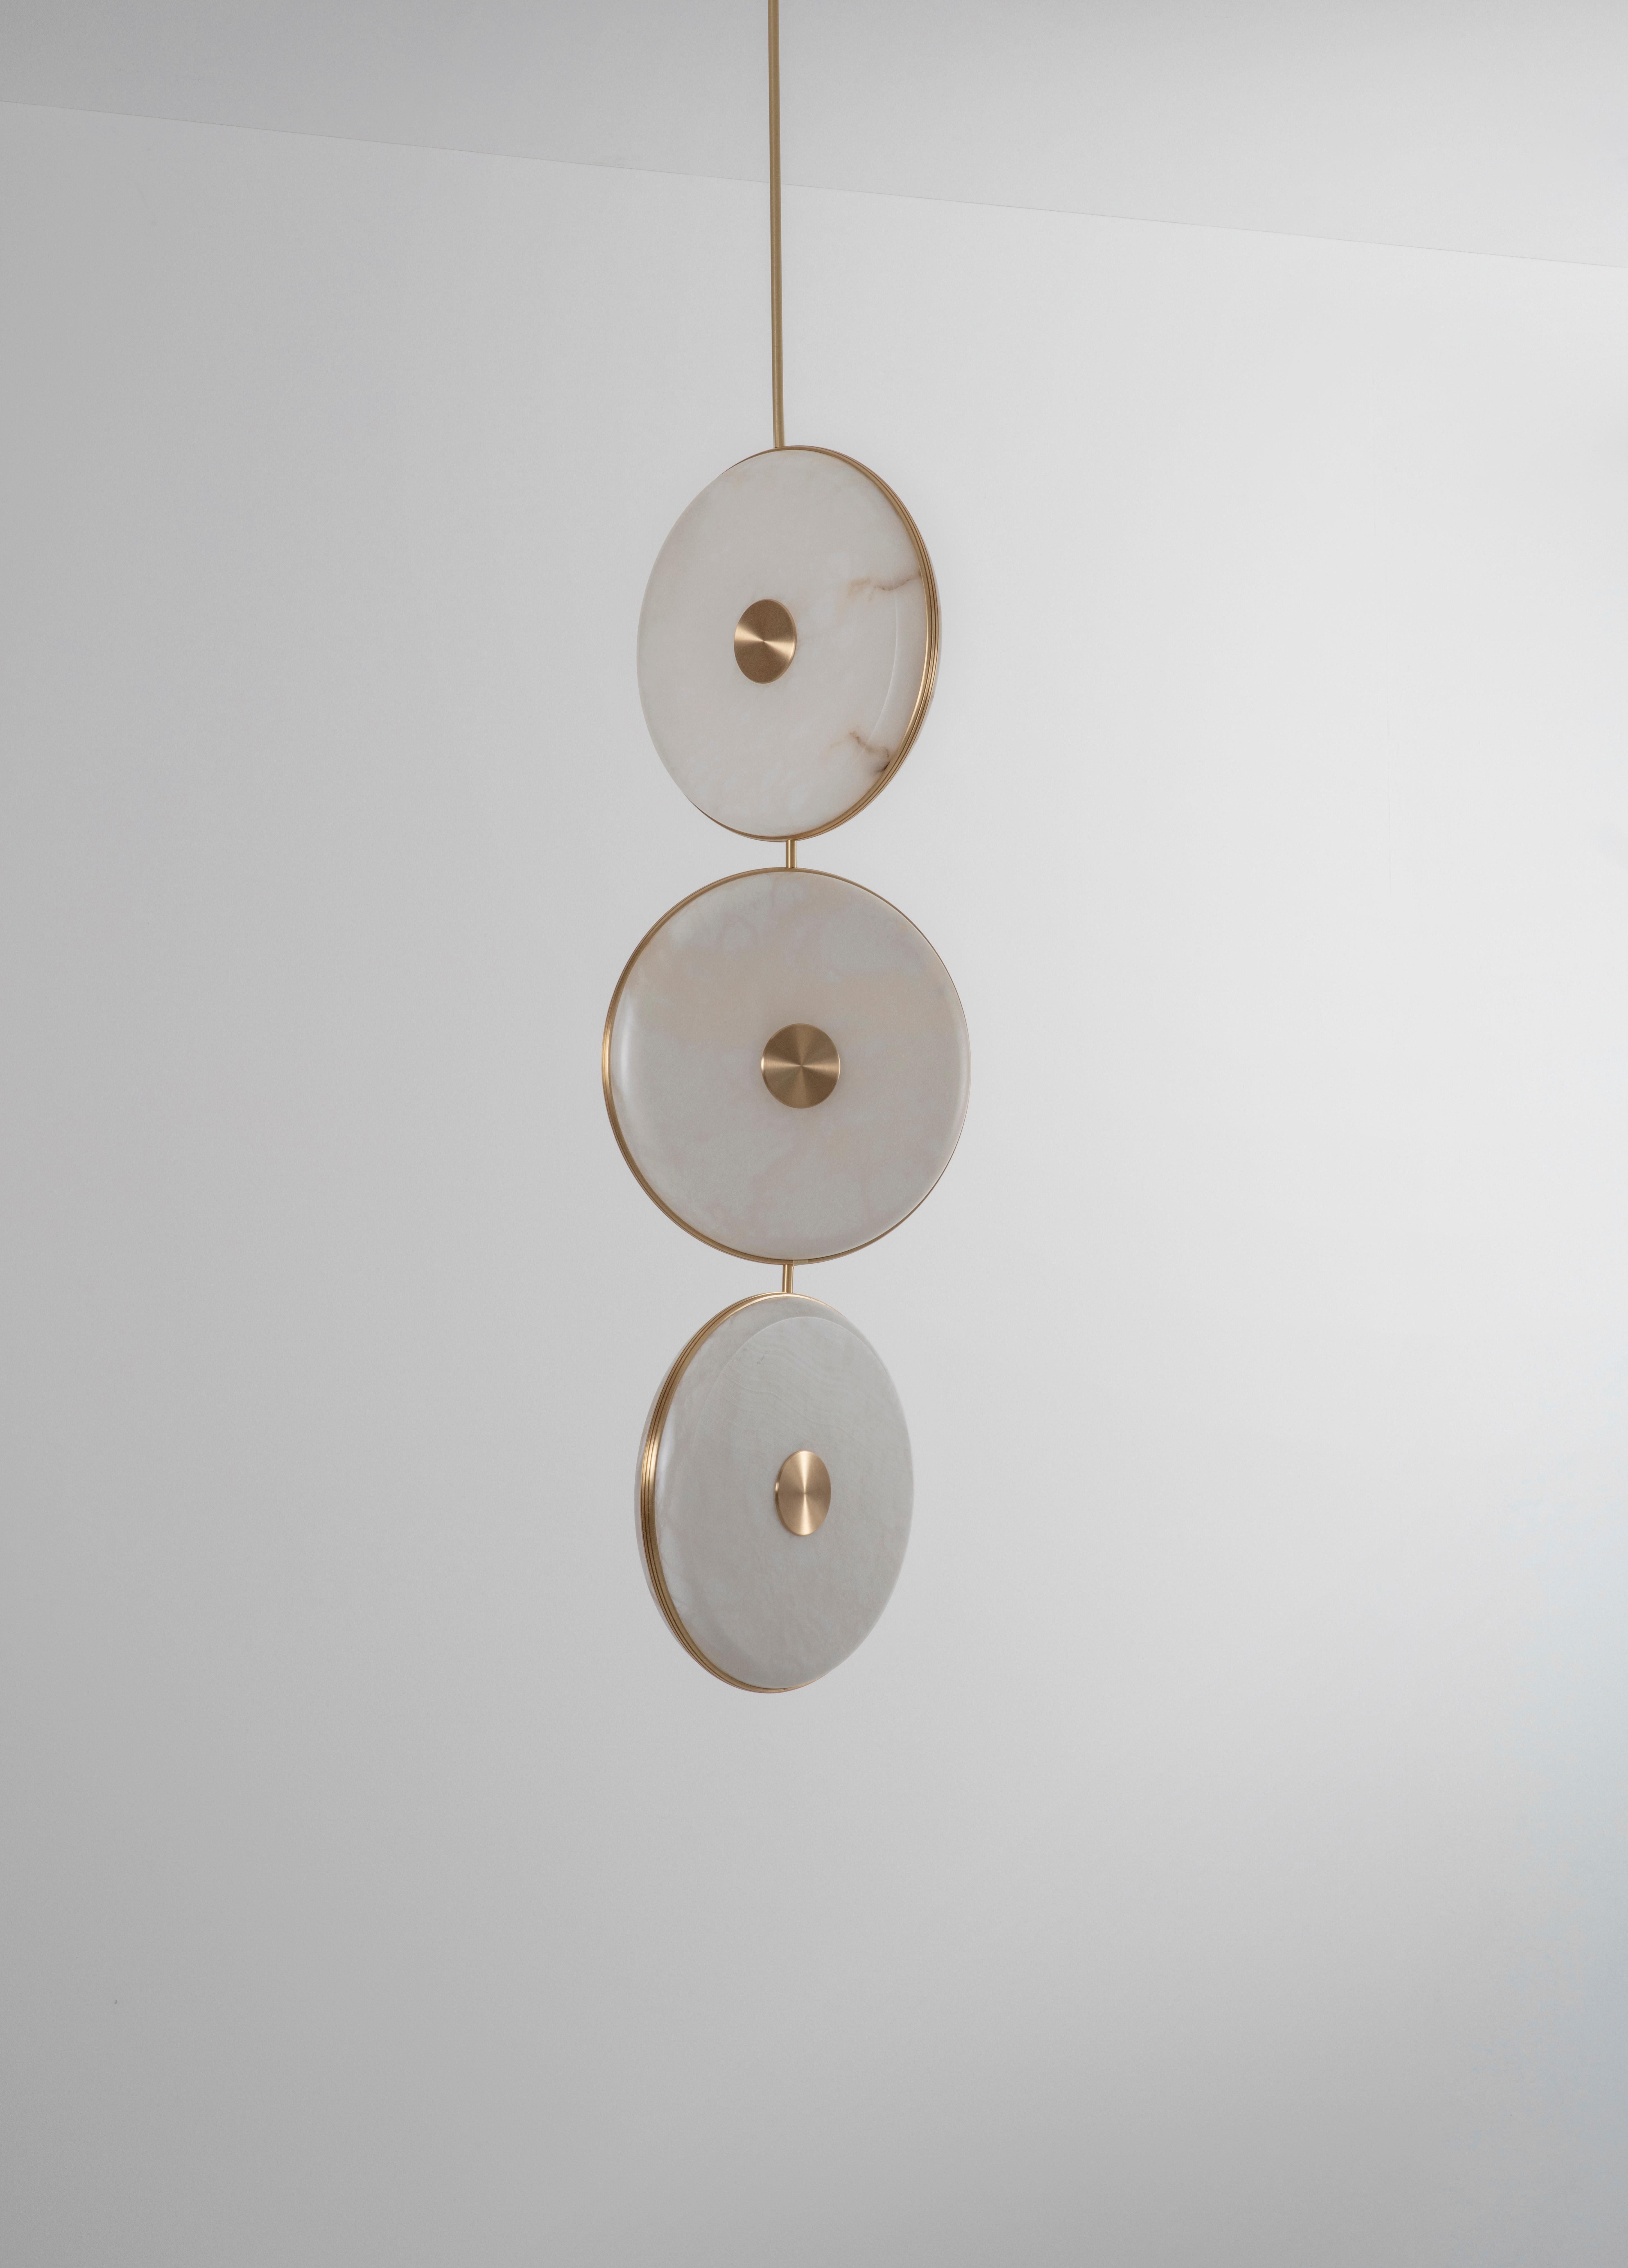 Beran Brushed Brass Small Drop 3 Chandelier by Bert Frank
Dimensions: Ø 26 x H 100 cm. 
Materials: Brass and alabaster.

Available in two different sizes. Available in different finishes and materials: Brushed brass, Antique brass, Dark bronze and